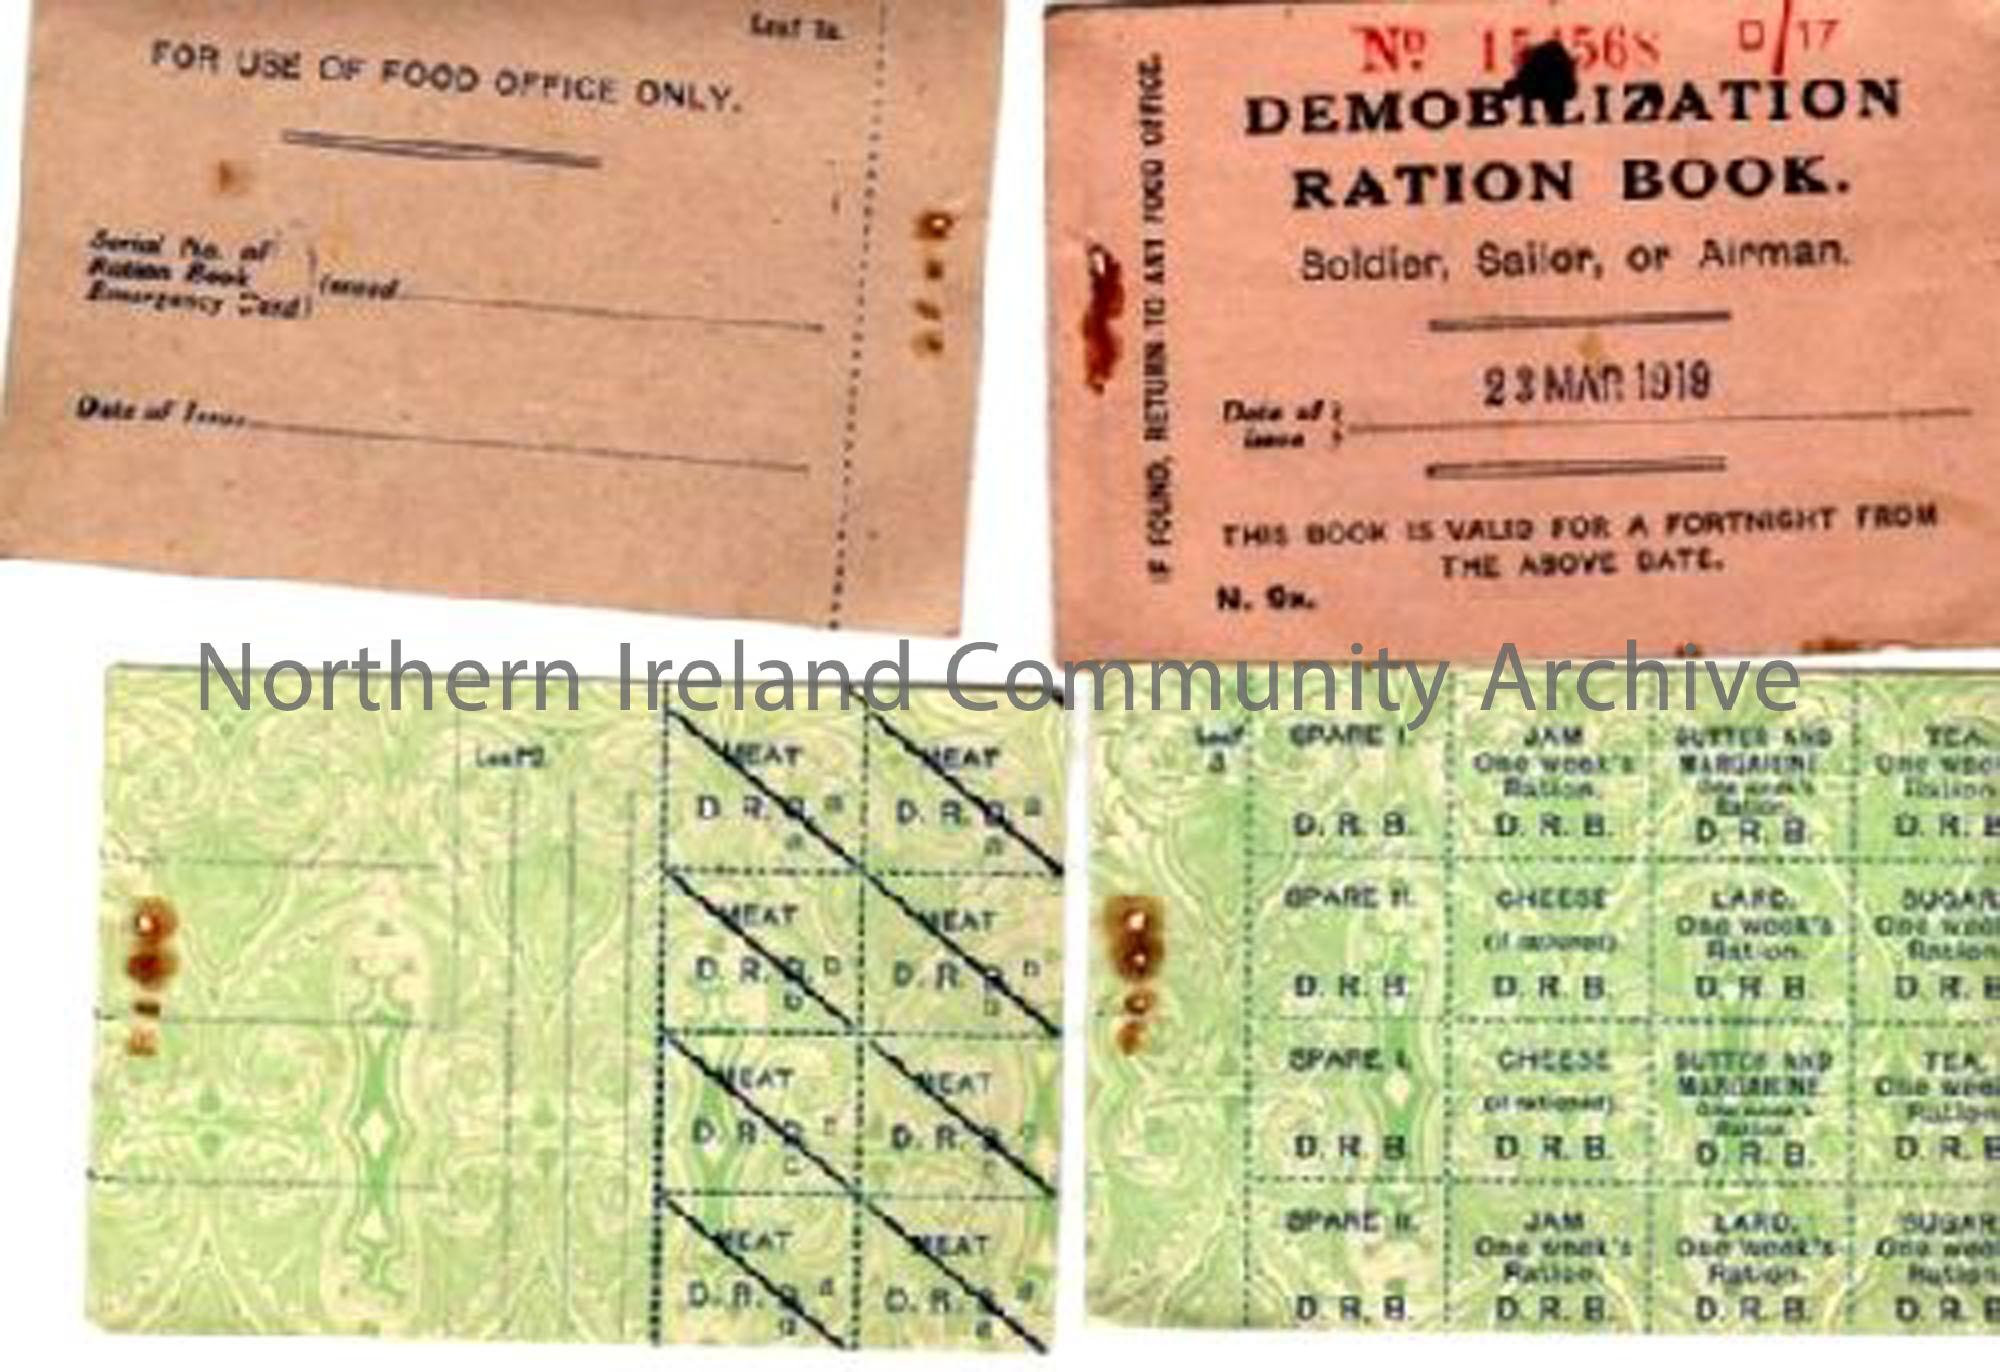 World War Two Ration Books, including a demobilisation ration book for soldiers, sailors or airmen. (3539)